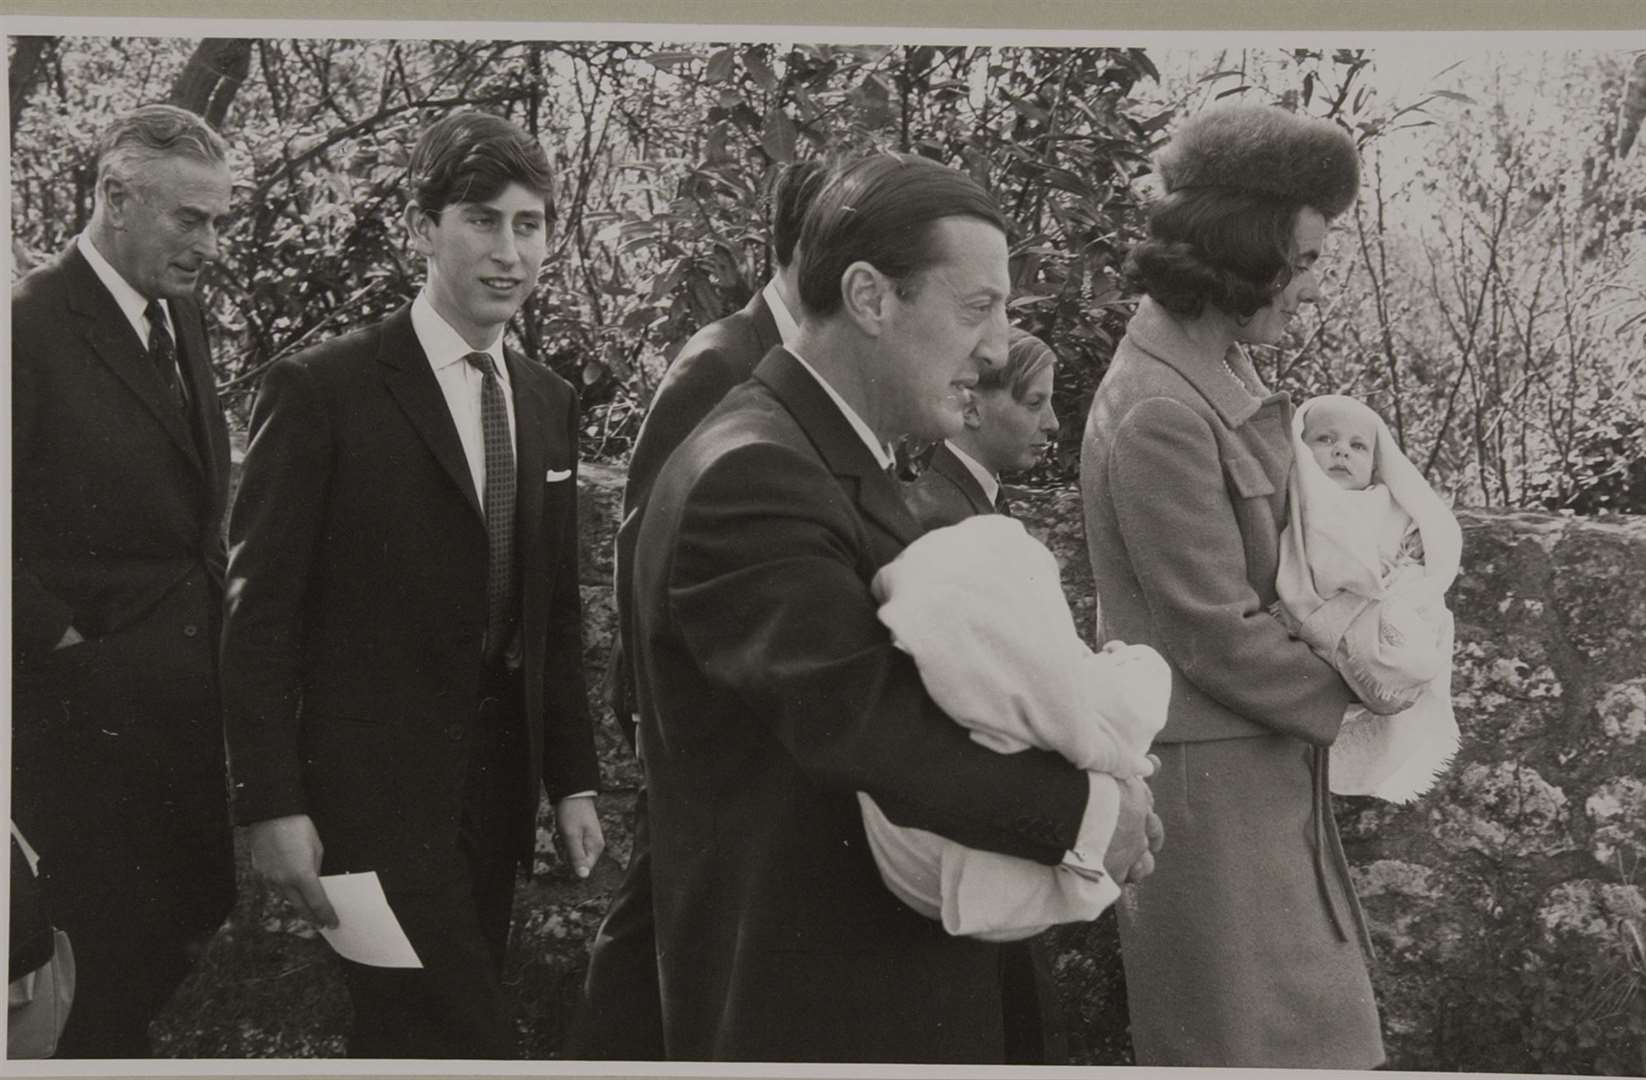 A young Prince Charles with Lord and Lady Brabourne after he stood as godfather to their identical twin sons Nicholas and Timothy. Lord Mountbatten joined them for the service